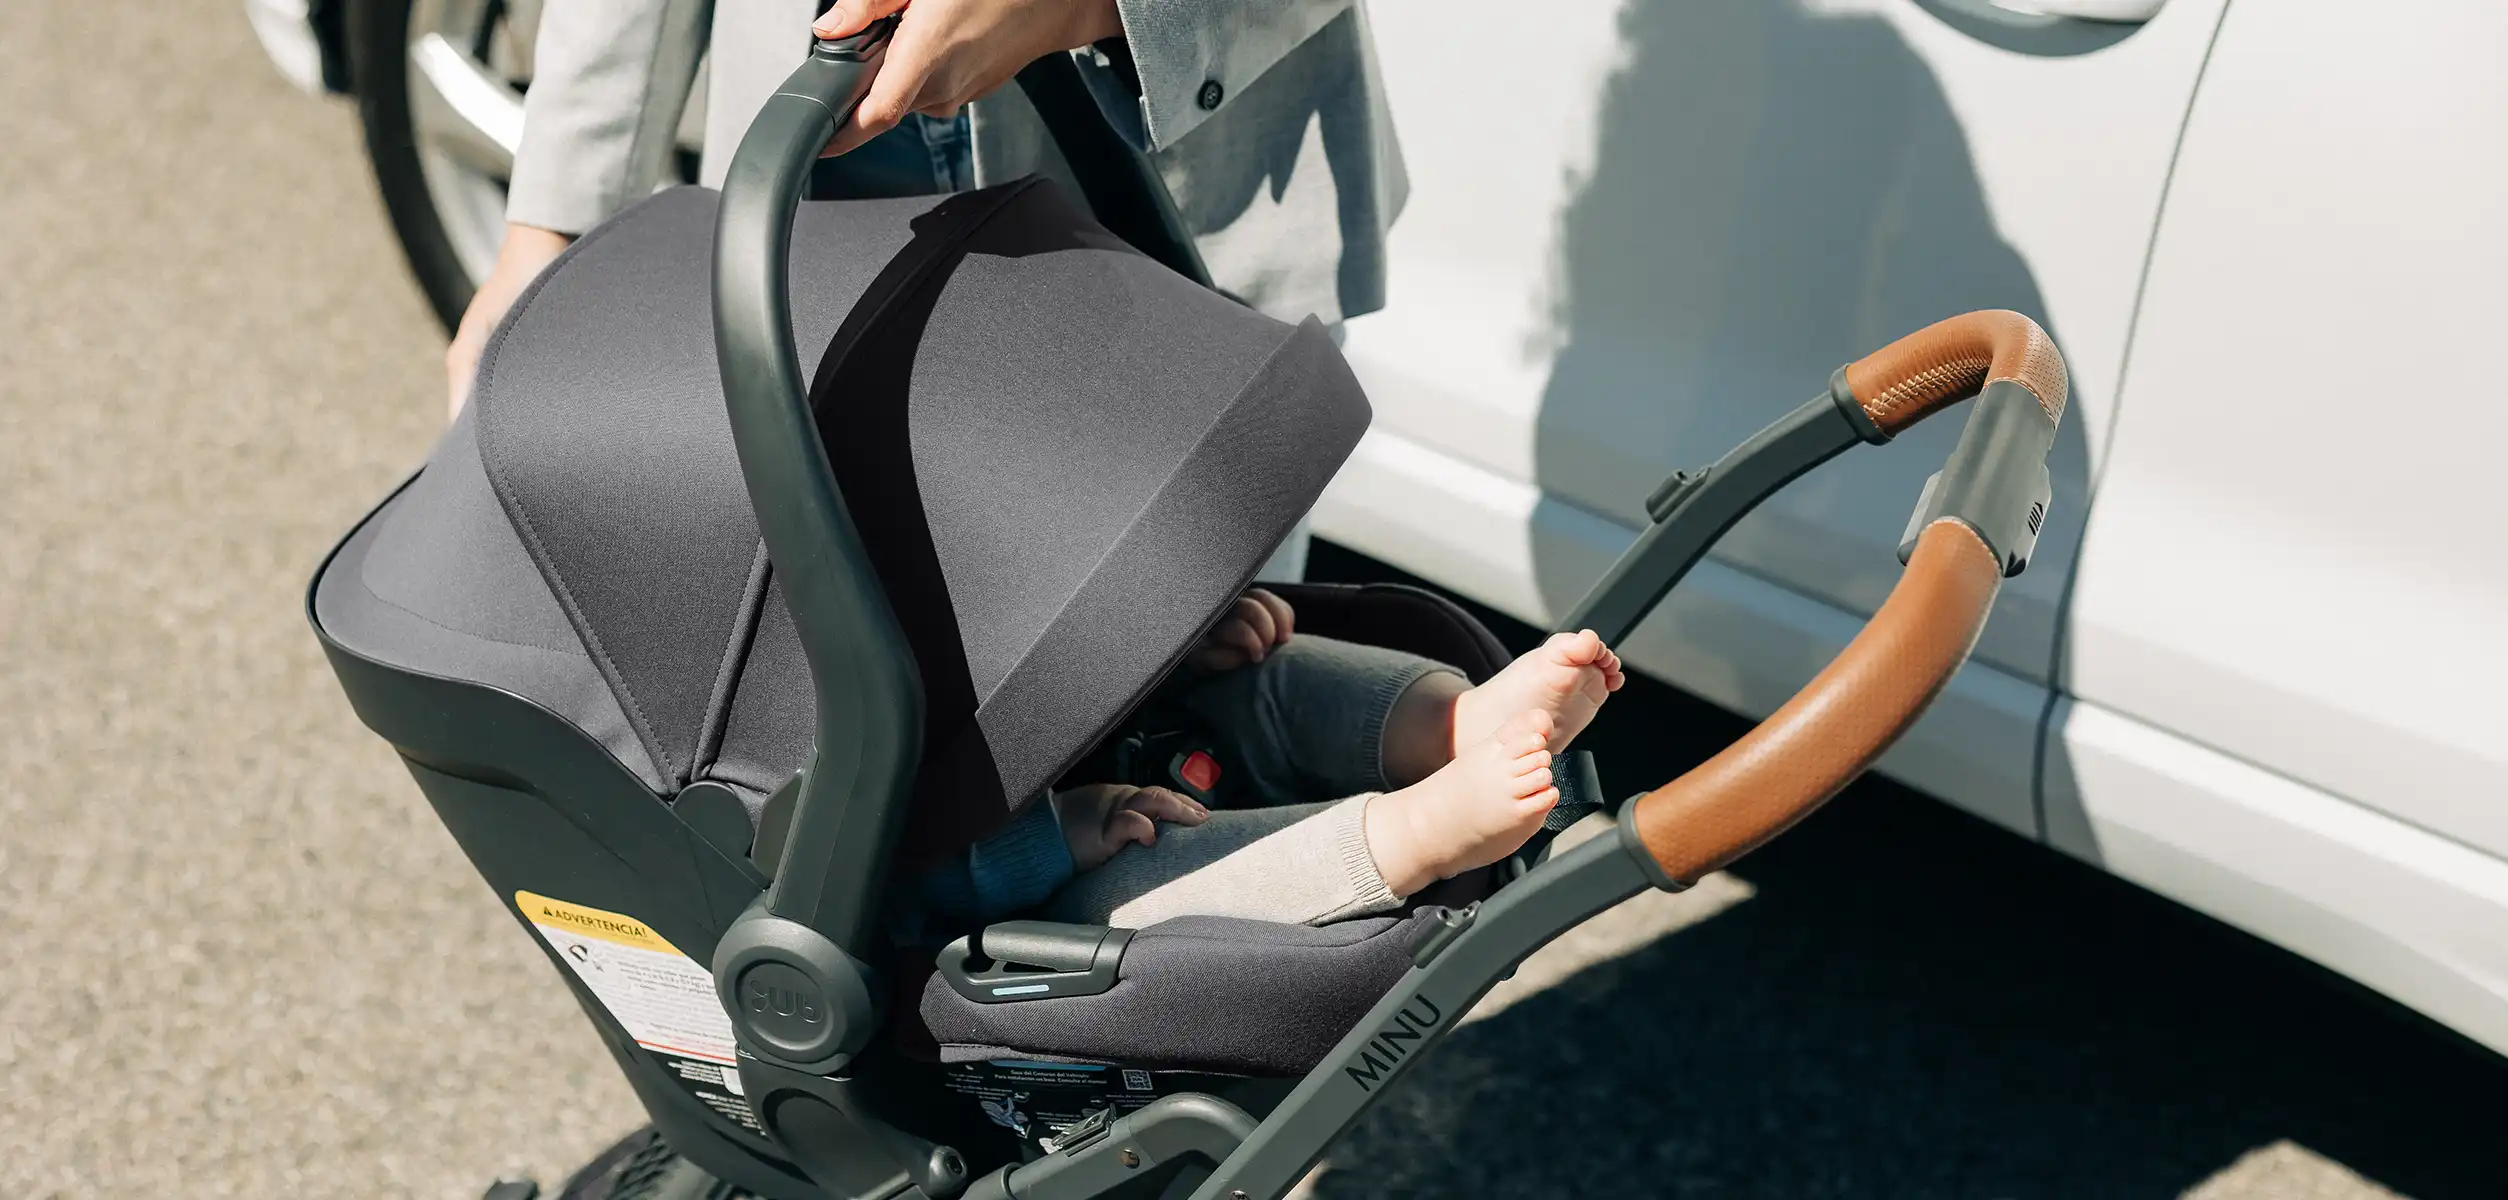 The Mesa Max Car Seat attaches to the Minu V2 frame with the help of convinient adapters to create a true travel system that allows for an easy switch from drive to stroll